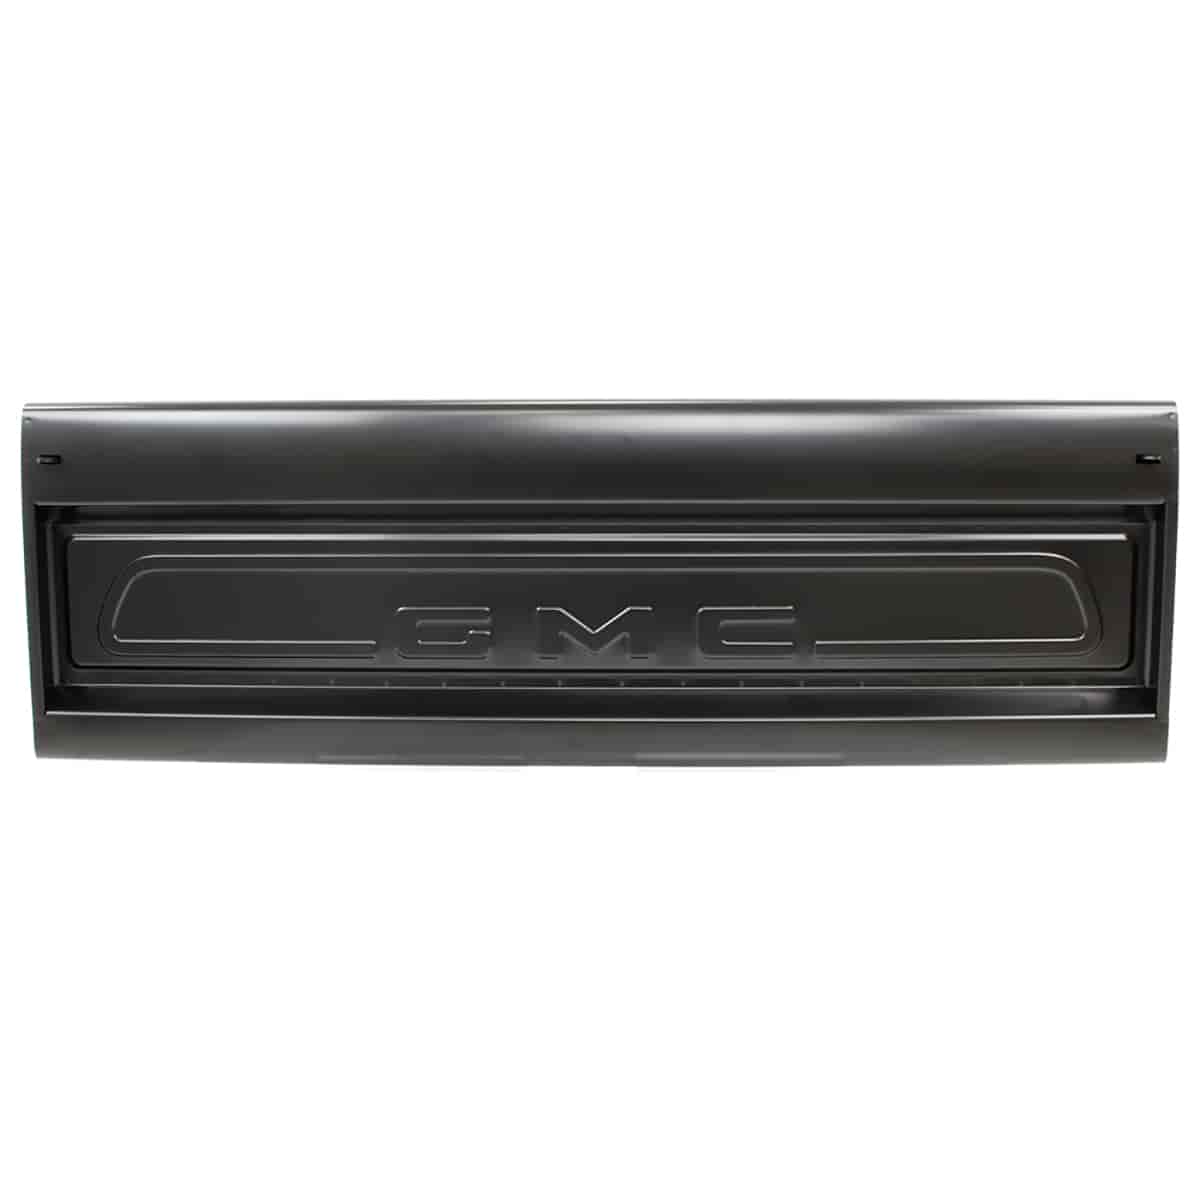 Tailgate for 1958-1966 GMC Fleetside Truck Bed with